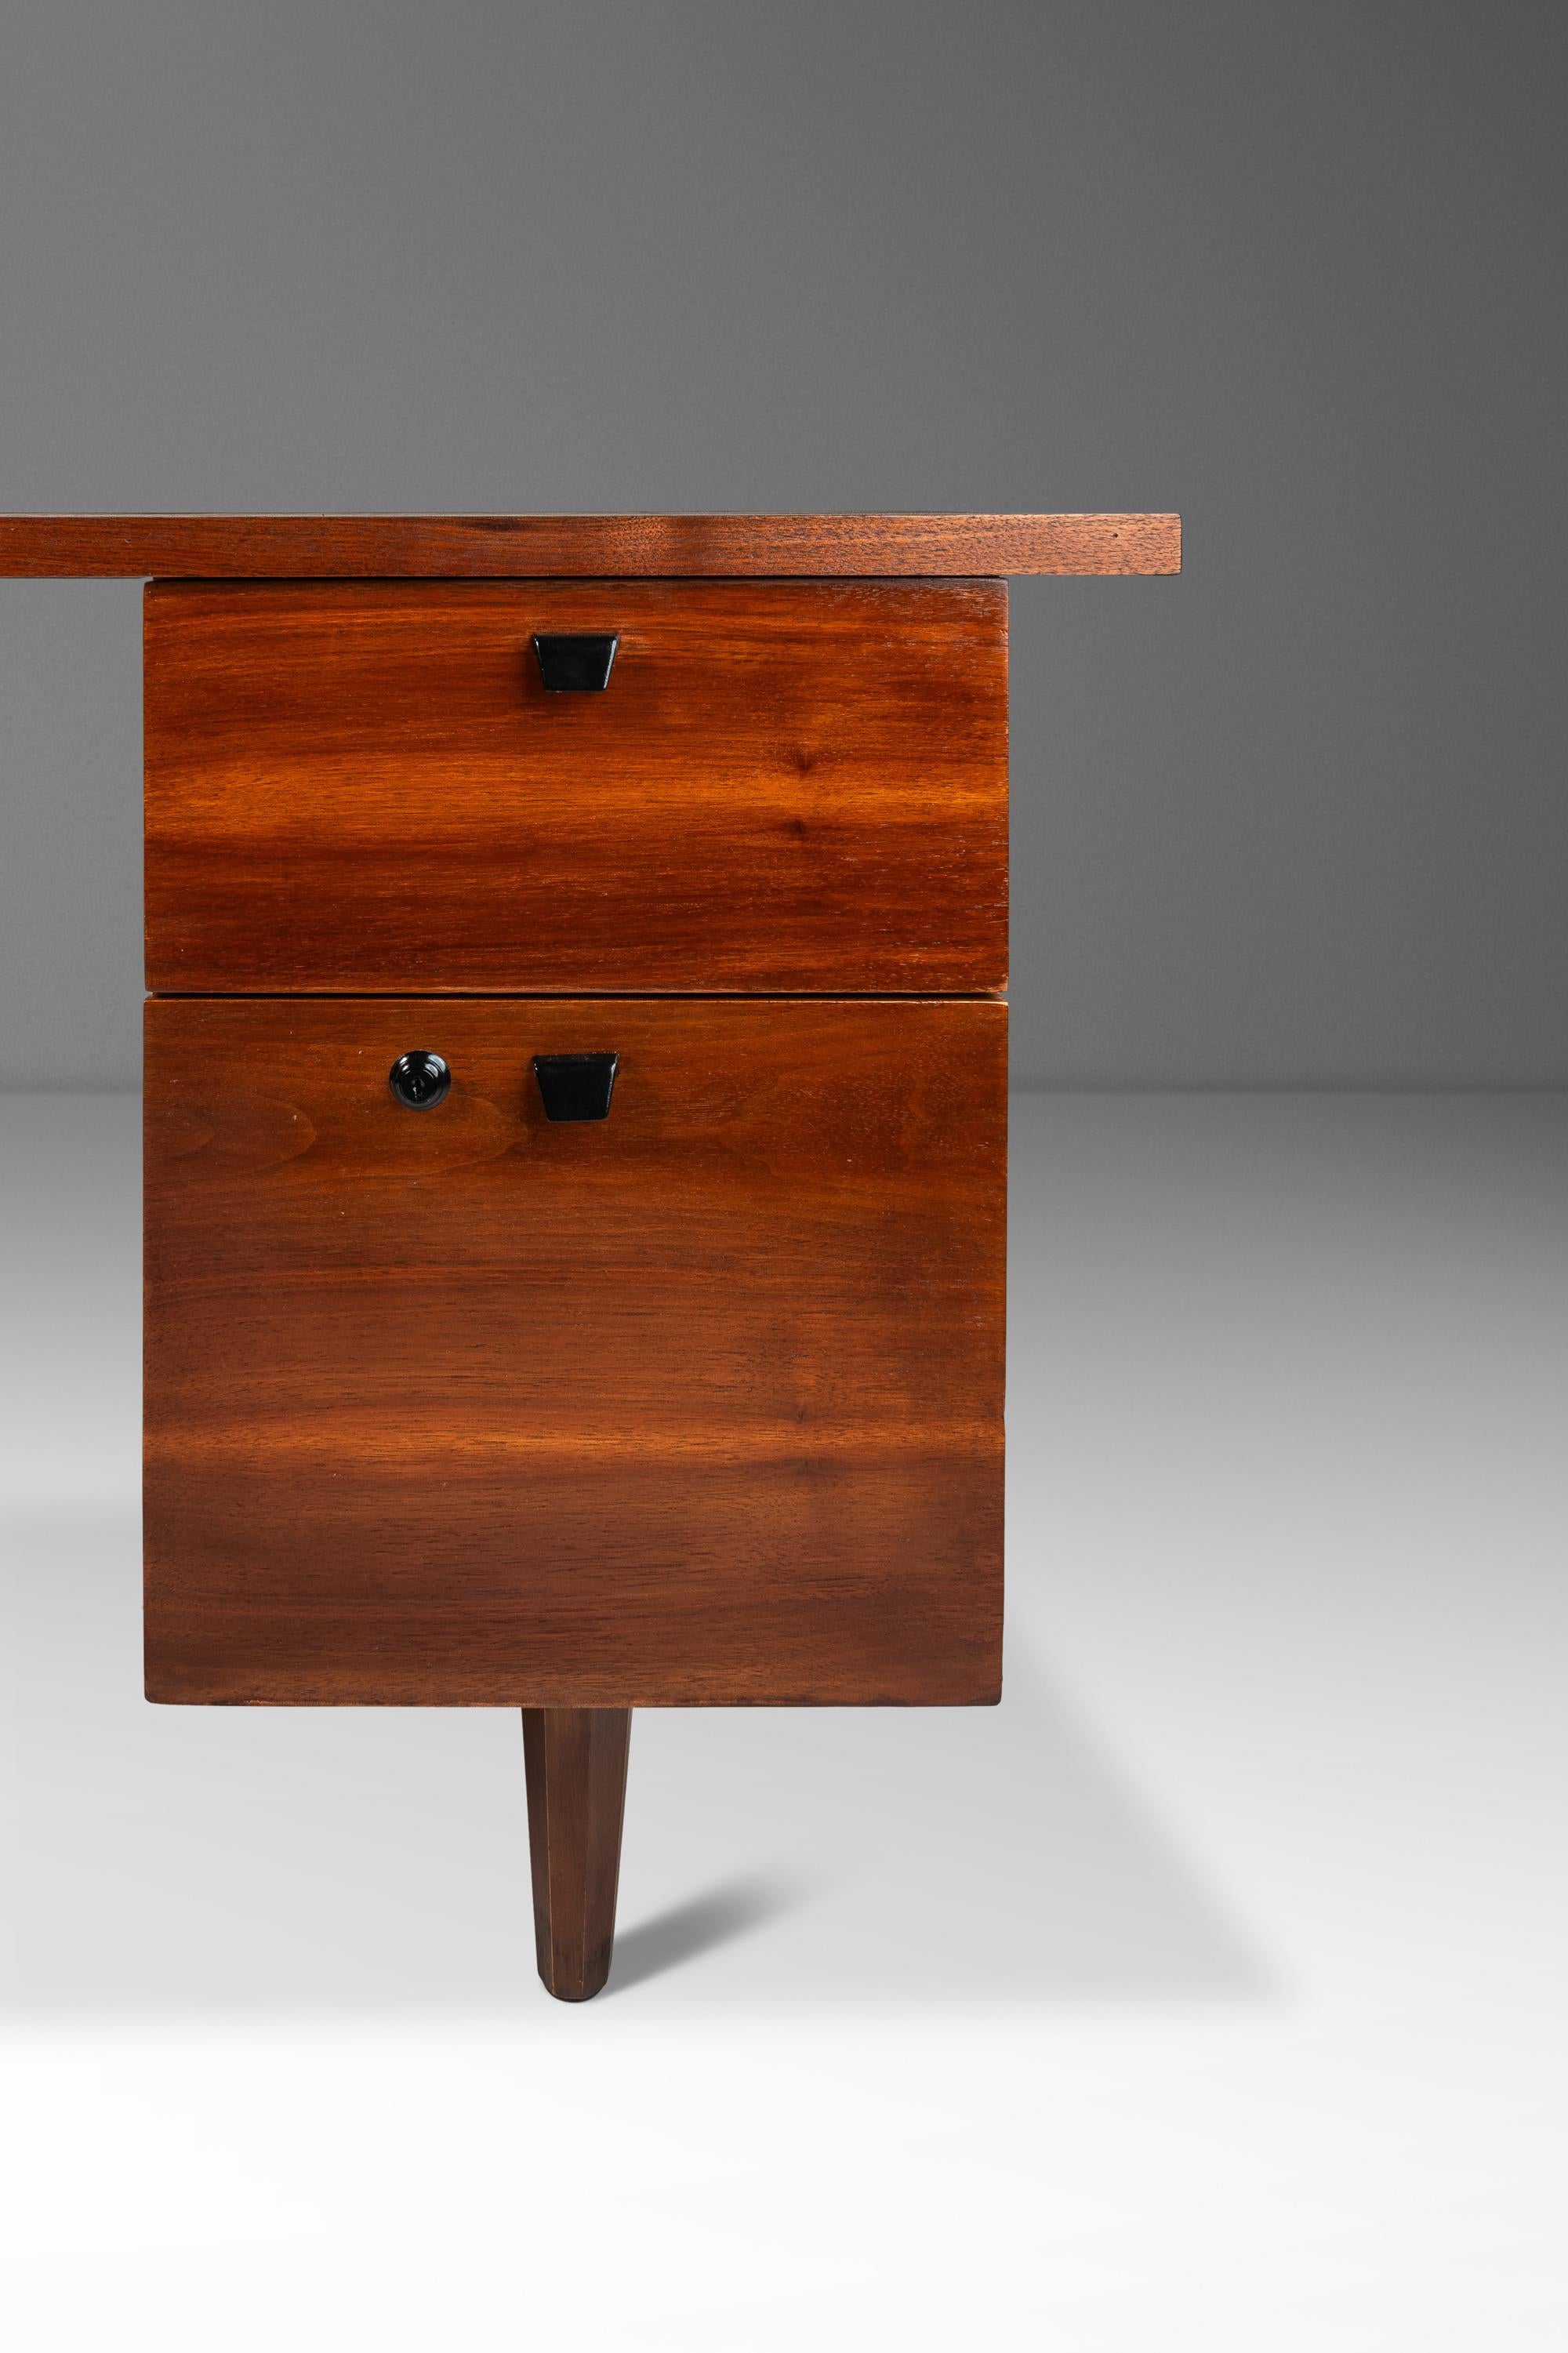 Restored Mid-Century Modern Writers Desk in Walnut with Leather Top, USA, 1960's For Sale 6